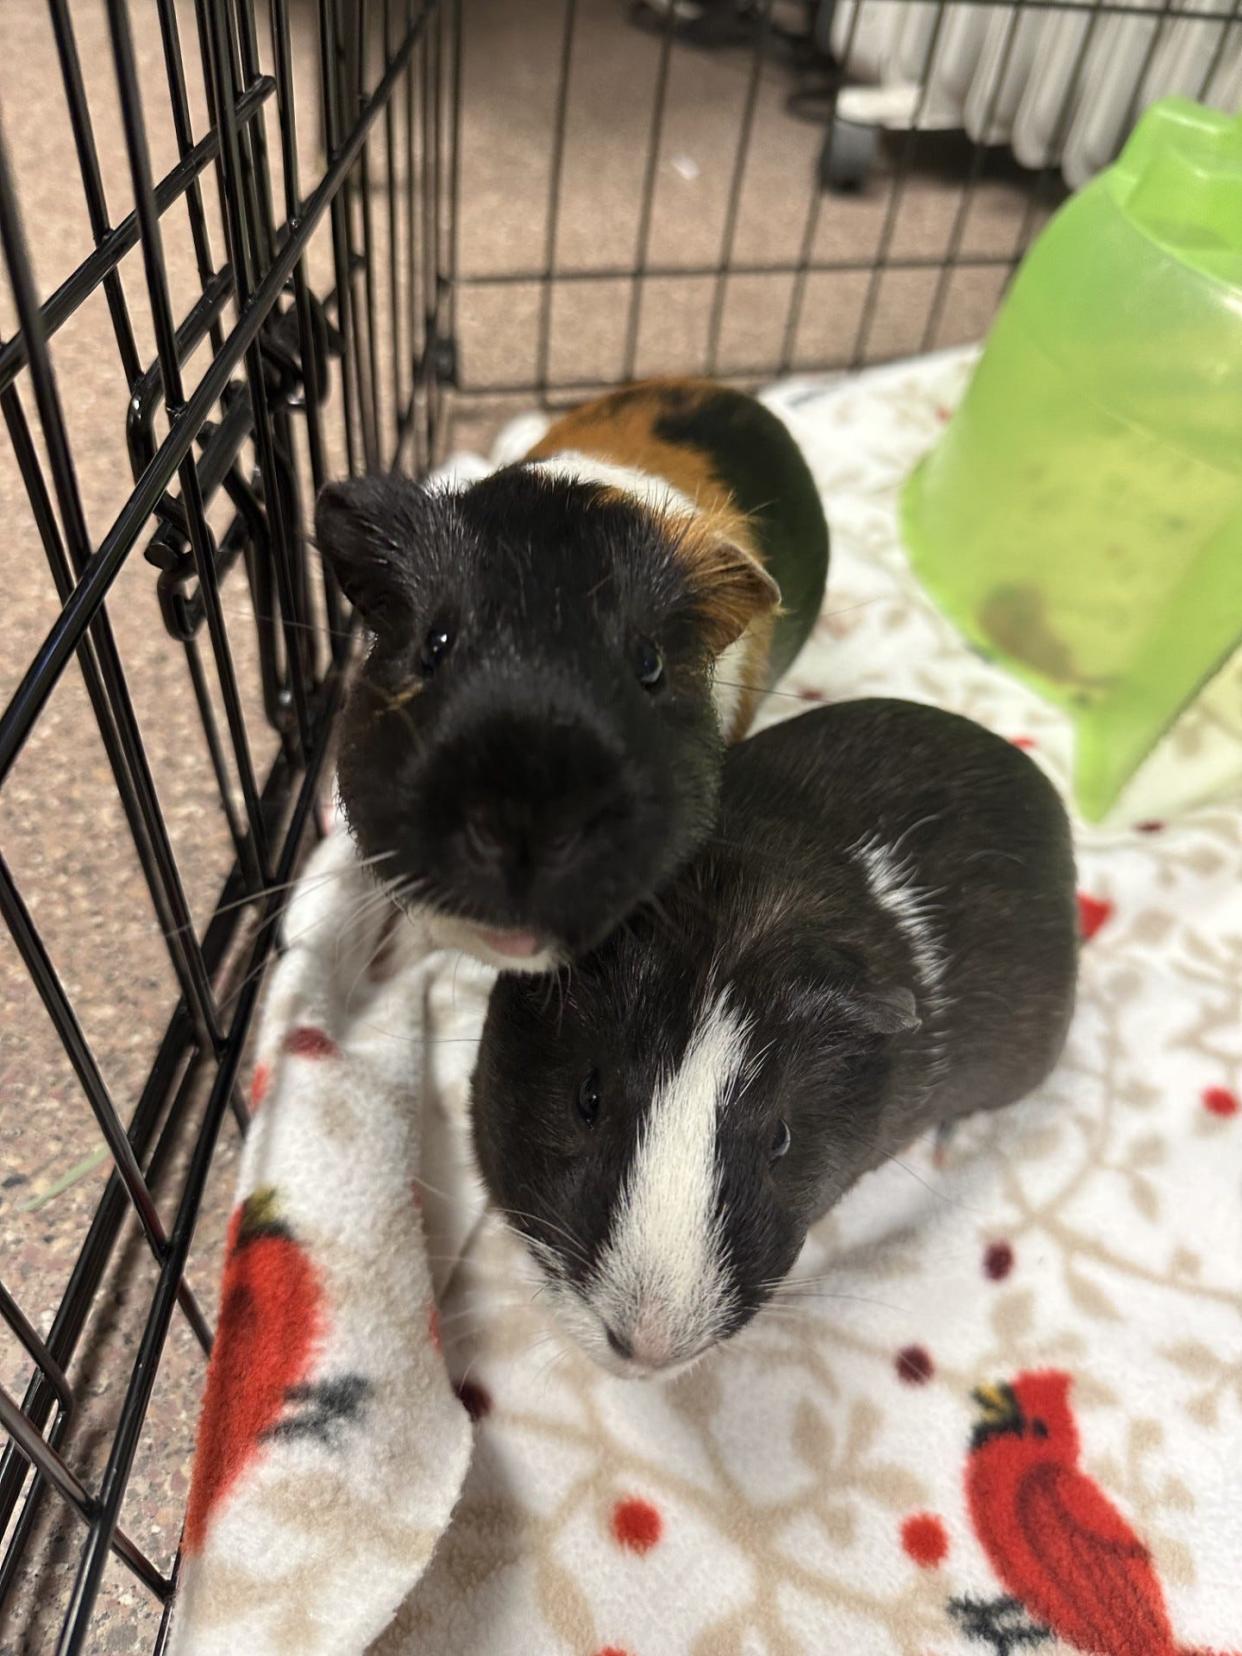 Quico and Chavo are two guinea pigs up for adoption at Greenhill Humane Society.